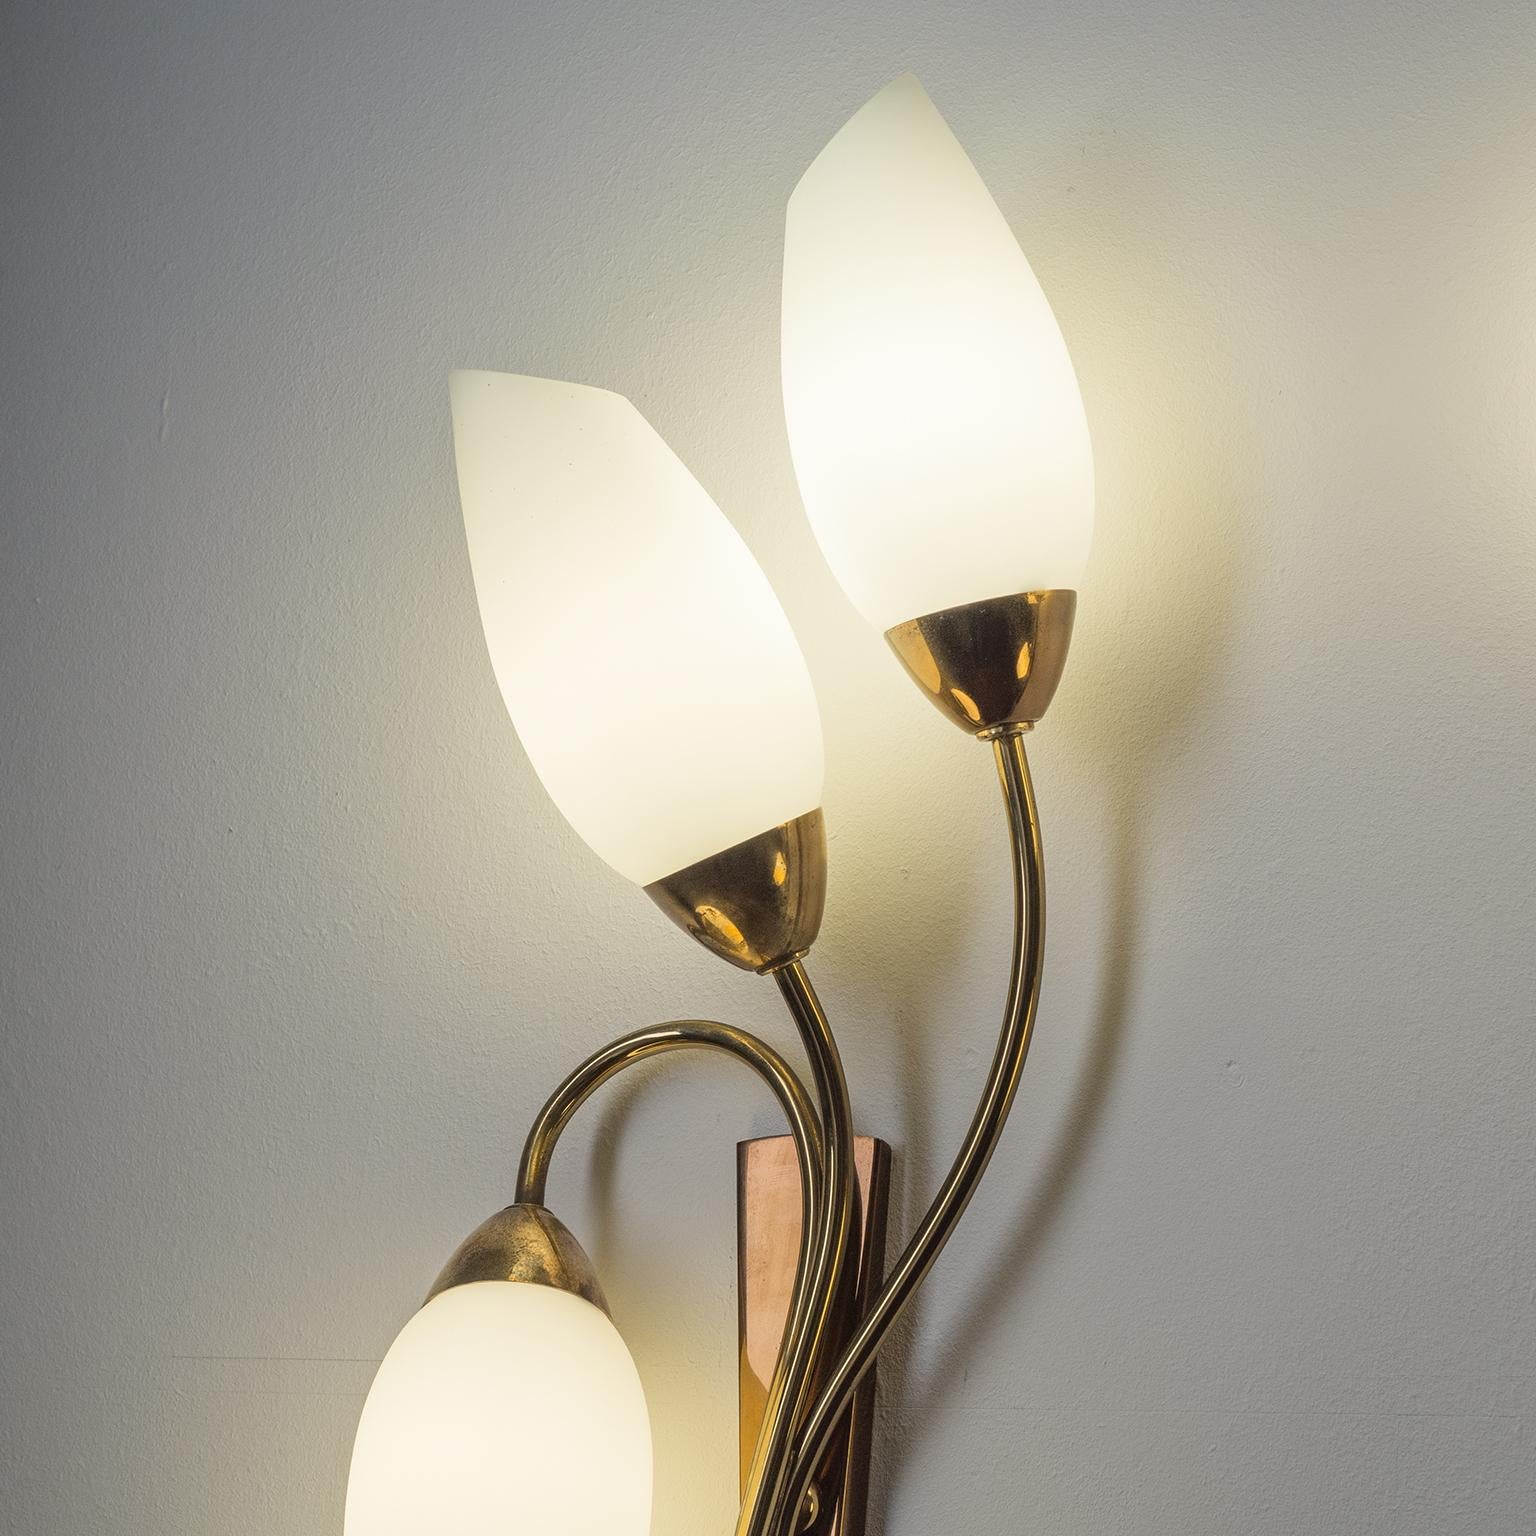 Large French Wall Lights, 1950s, Brass and Satin Glass 5